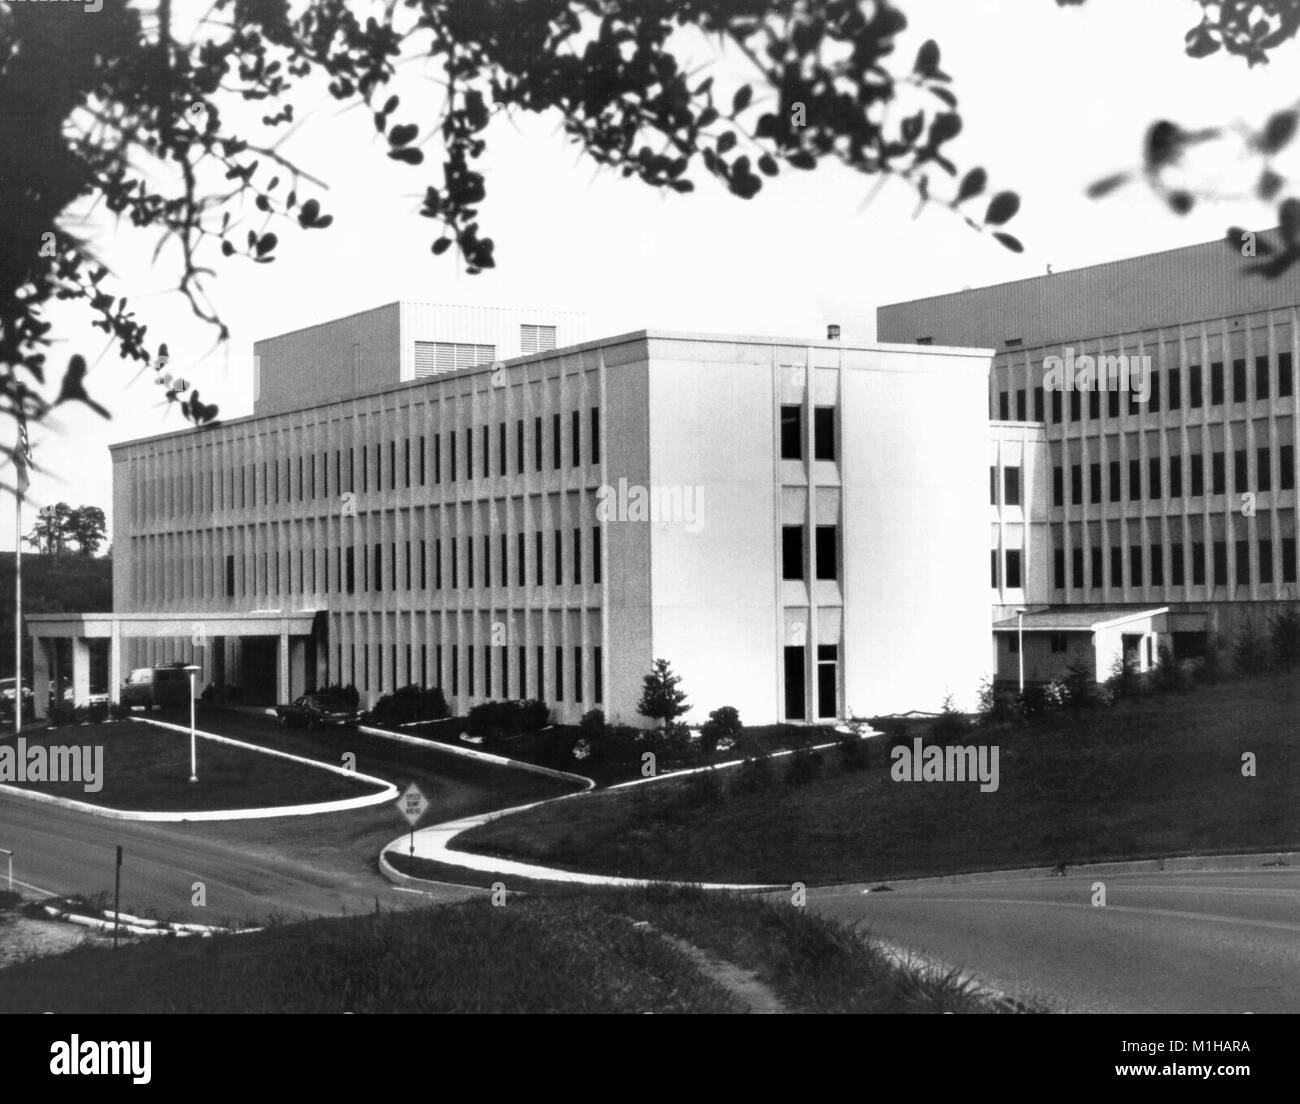 Photograph showing an elevated view of a building in full-heght, the National Institute for Occupational Safety and Health (NIOSH), in Morgantown, West Virginia, 1956. Image courtesy CDC. () Stock Photo